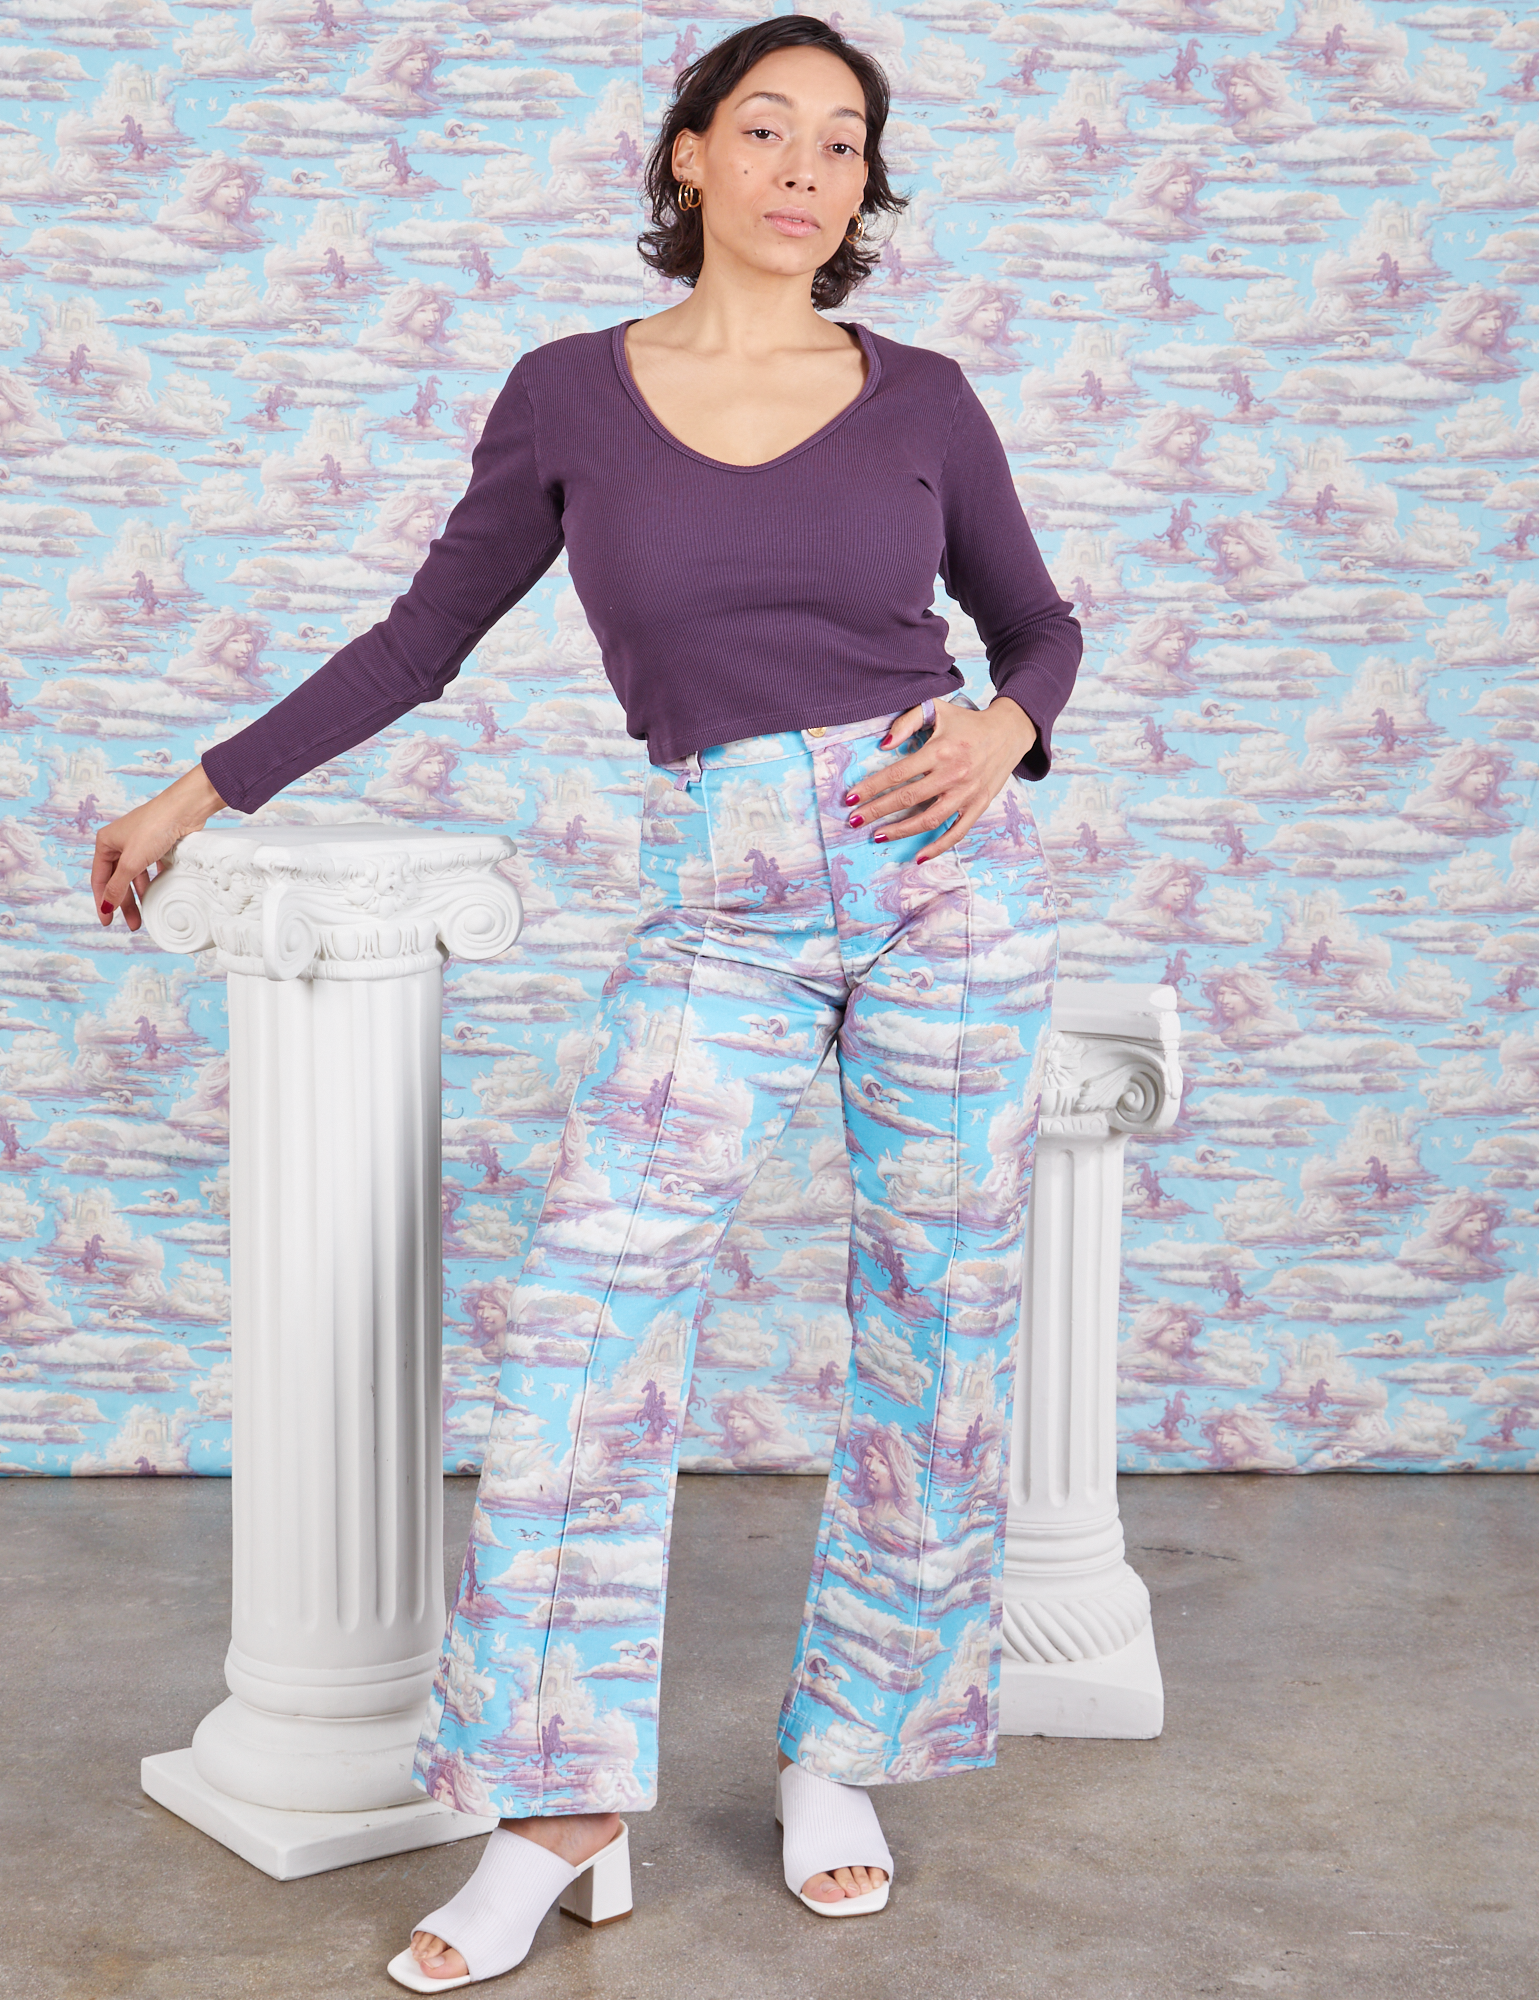 Tiara is 5&#39;4&quot; and wearing S Western Pants in Cloud Kingdom paired with nebula Long Sleeve V-Neck Tee